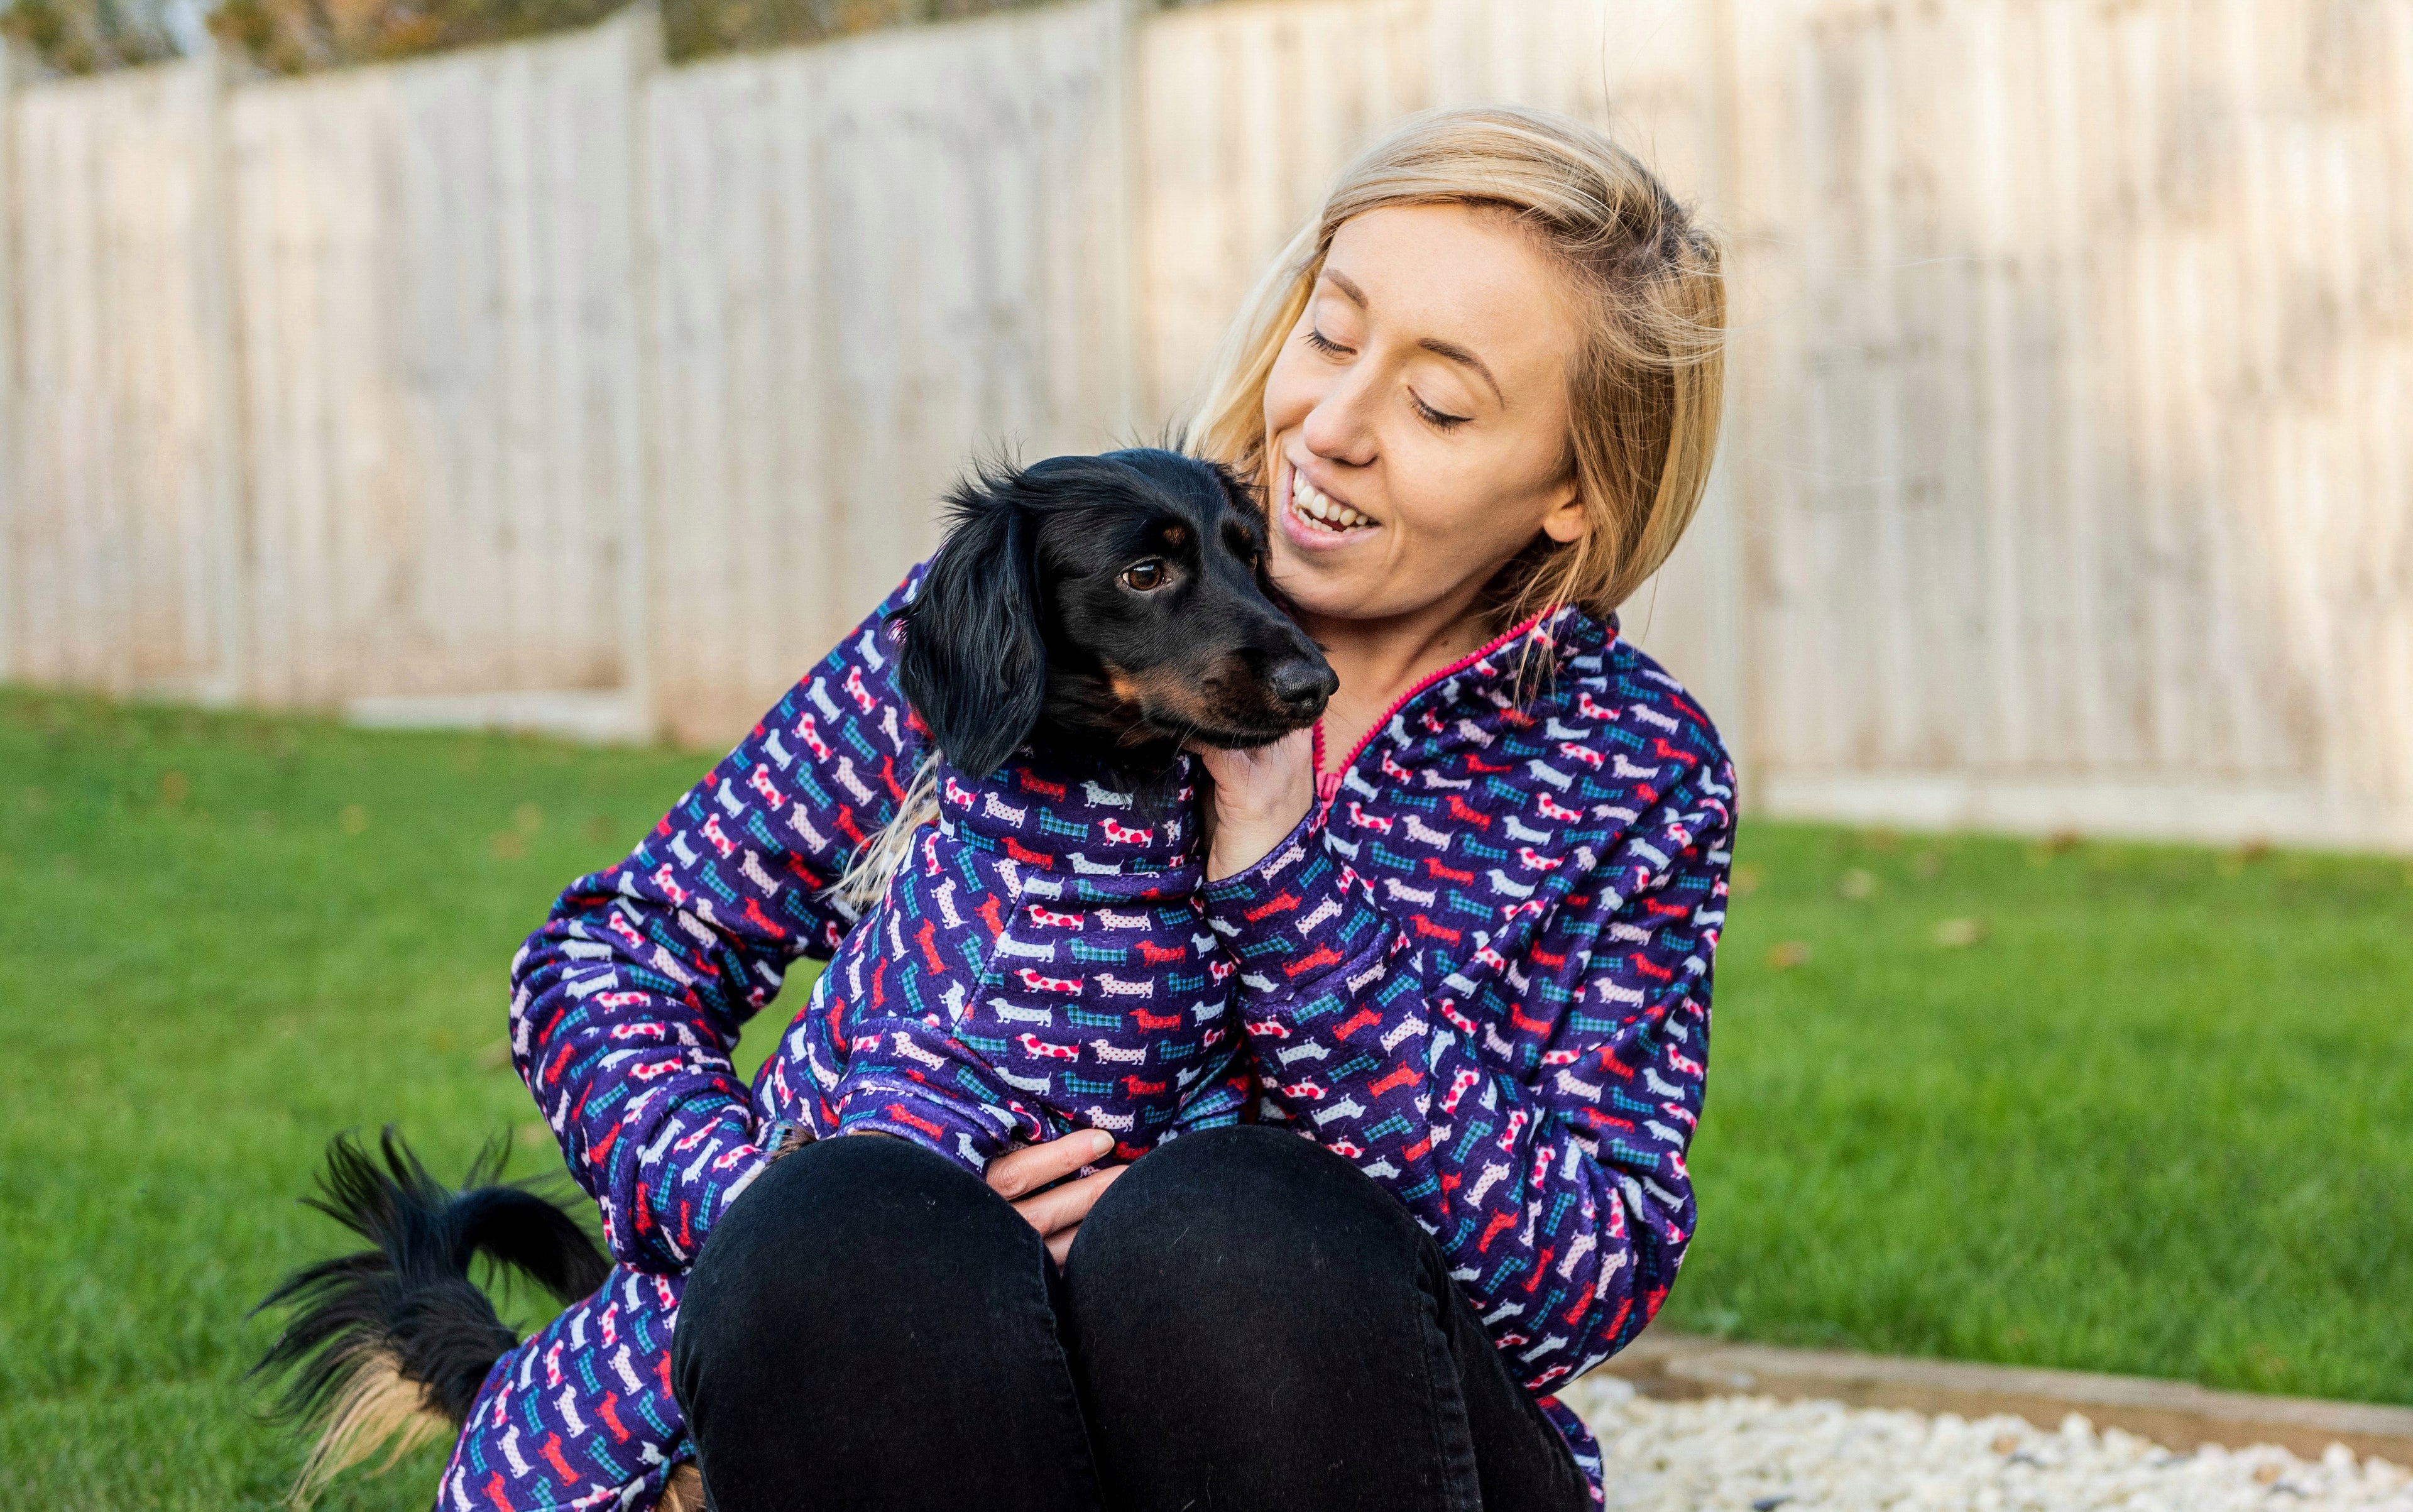 Blonde woman and her miniature dachshund wearing matching jumpers with a dachshund print design.